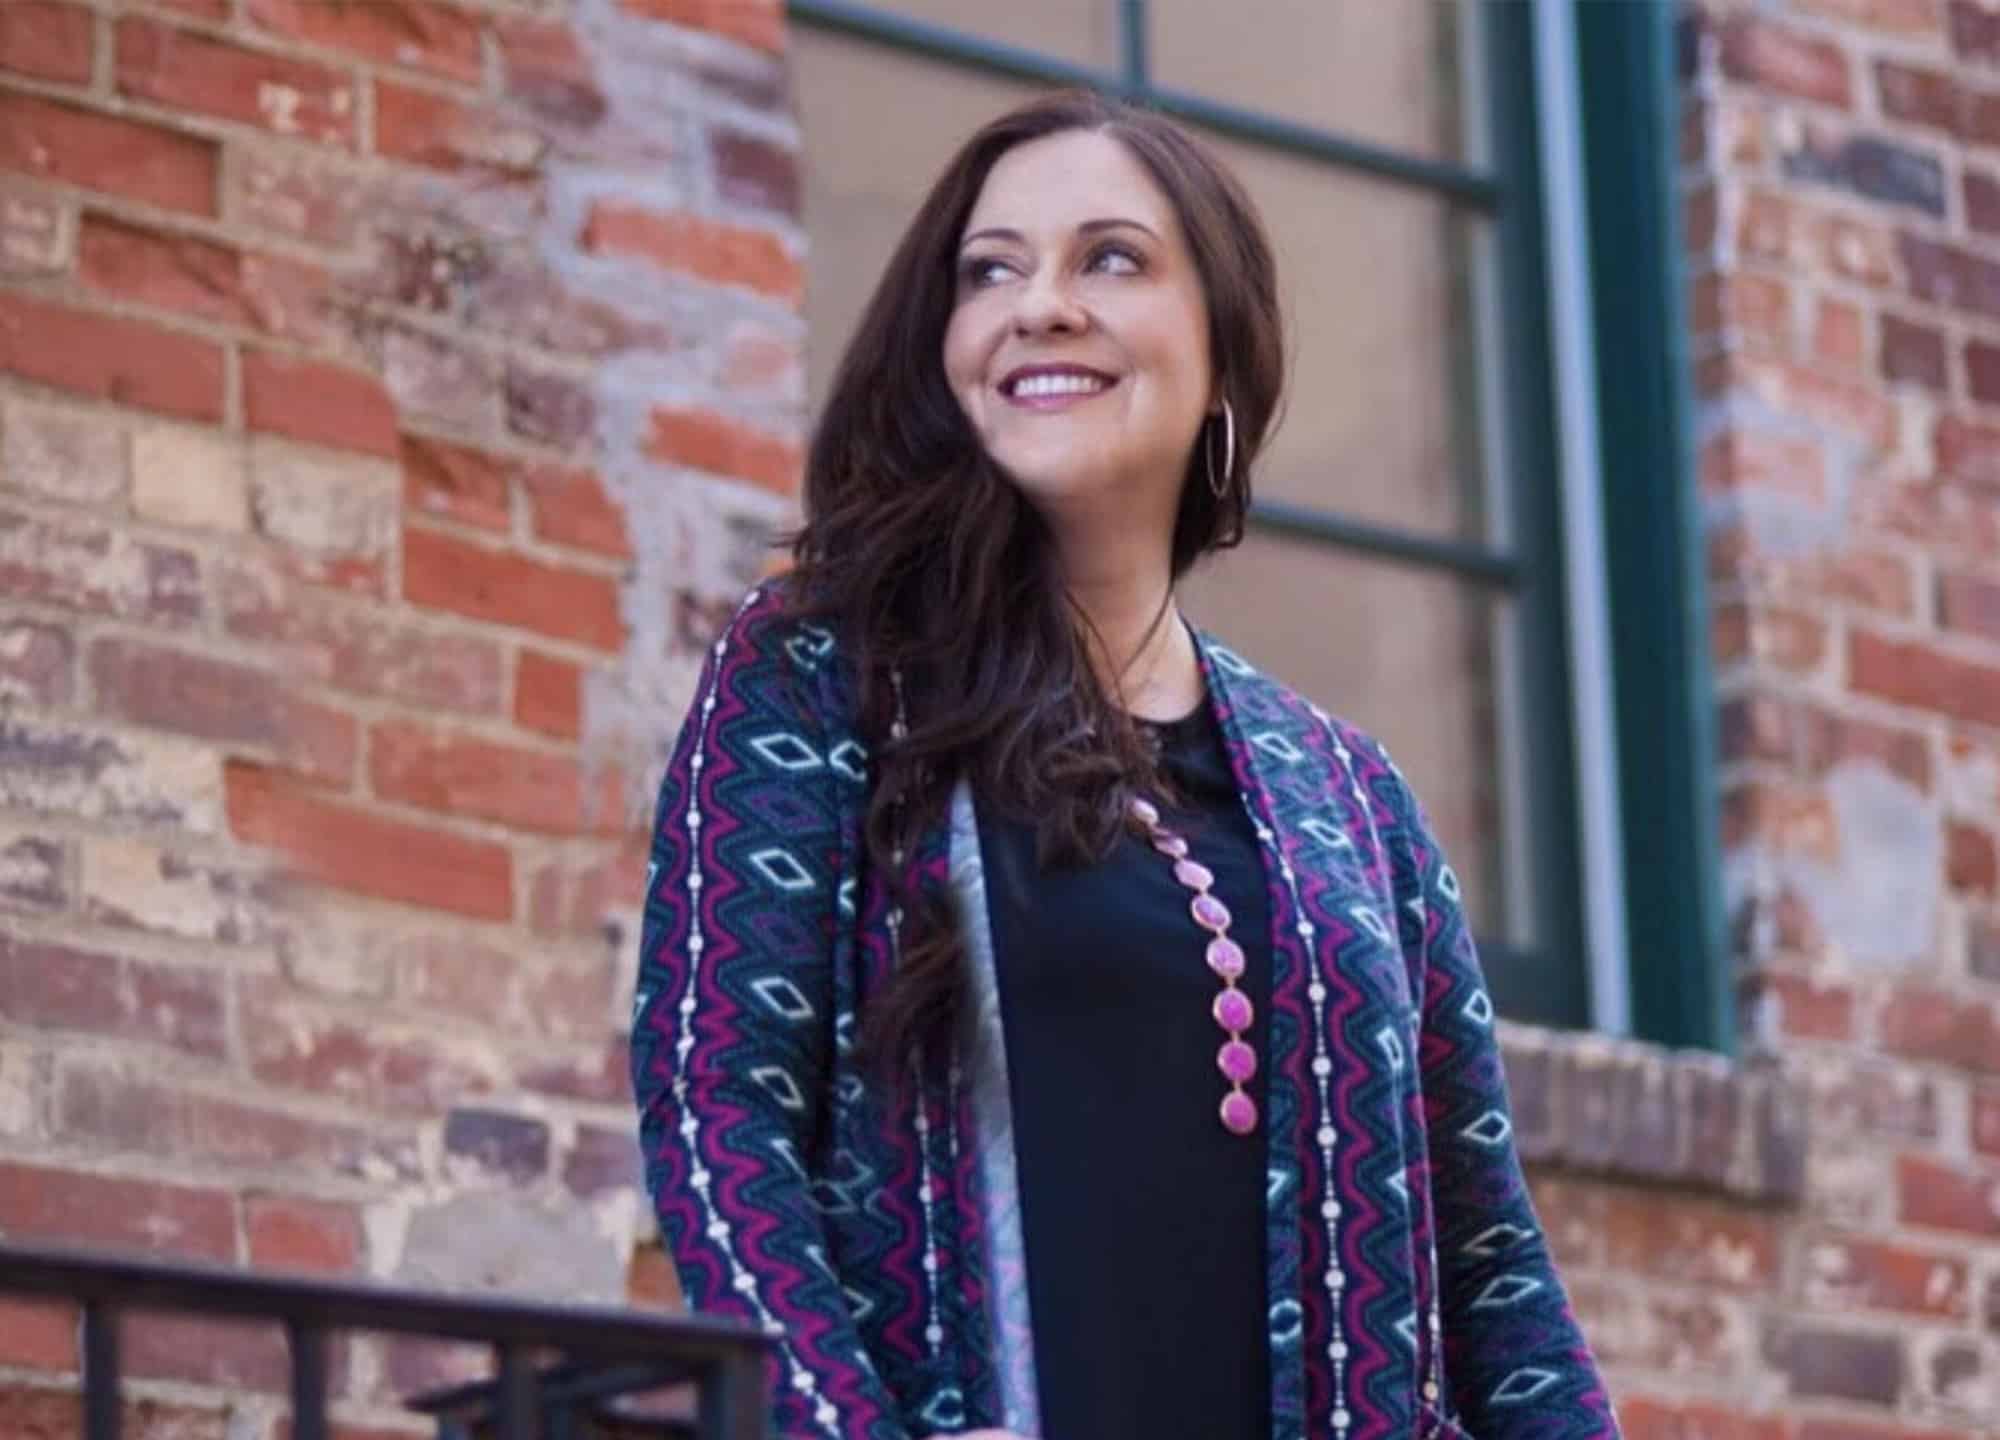 Courtney Harwood, a former LulaRoe retailer featured in LulaRich, talks about its cultlike atmosphere where image was everything.